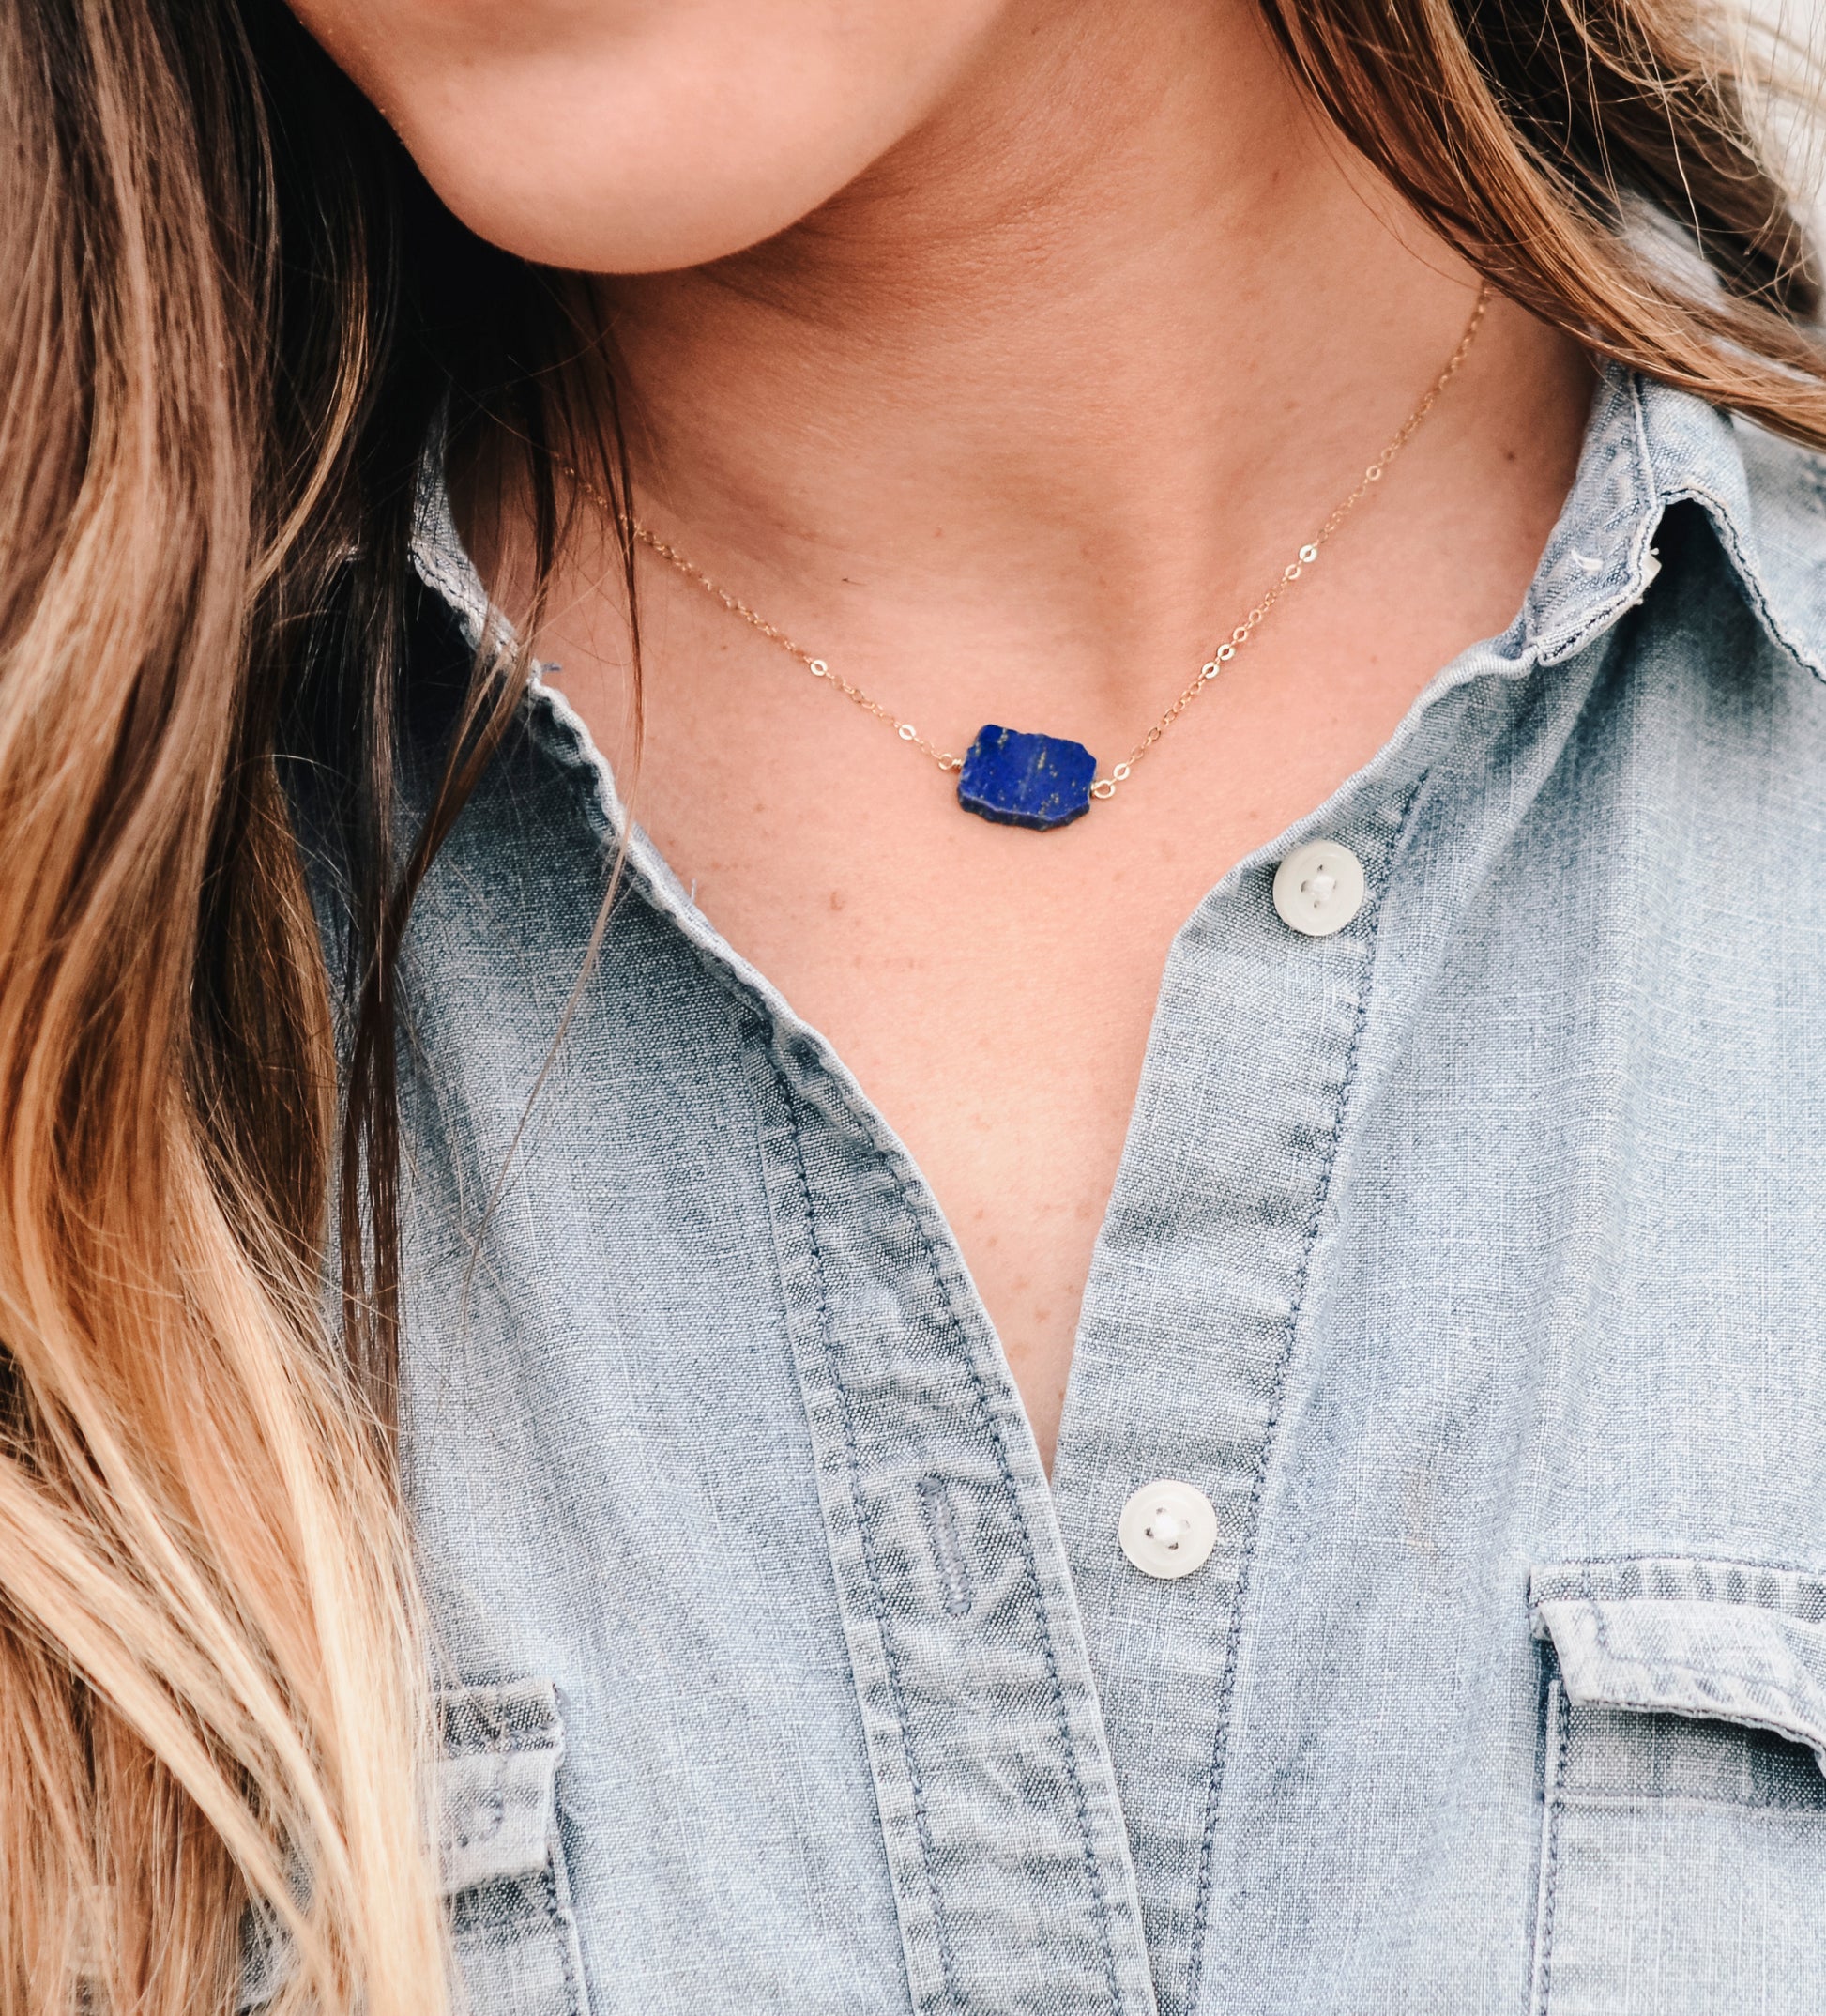 Natural blue lapis lazuli slice set onto a sterling silver chain. The stone is smooth polished with raw edges and oval in shape. Natural pyrite and calcite flecks are visible within each stone. Modeled image.